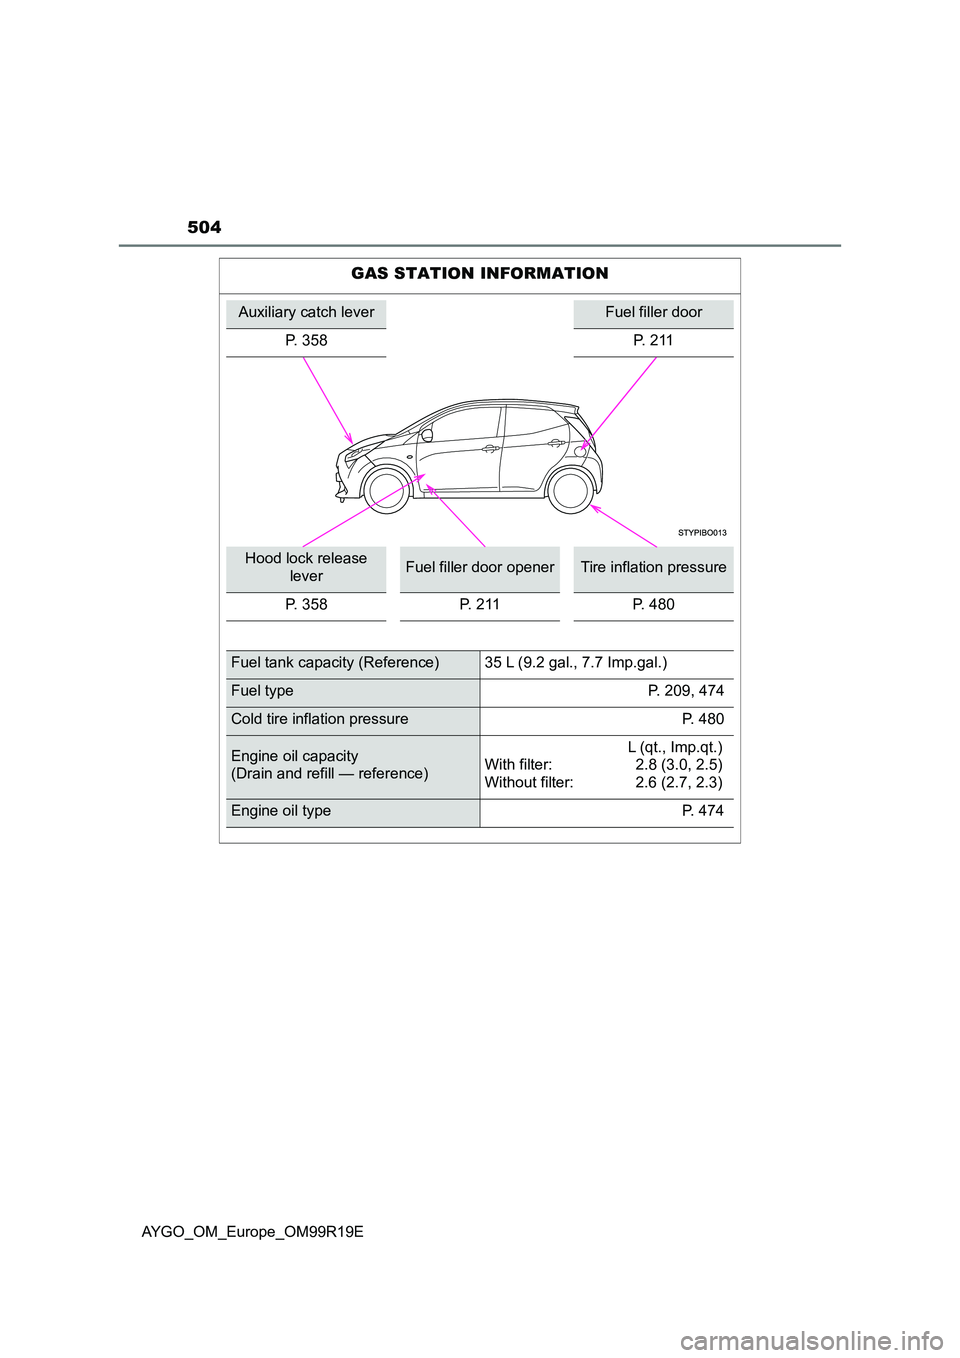 TOYOTA AYGO 2019  Owners Manual (in English) 504
AYGO_OM_Europe_OM99R19E
GAS STATION INFORMATION
Auxiliary catch leverFuel filler door 
P. 358P.  2 1 1
Hood lock release  
leverFuel filler door openerTire inflation pressure 
P. 358 P. 211 P. 480